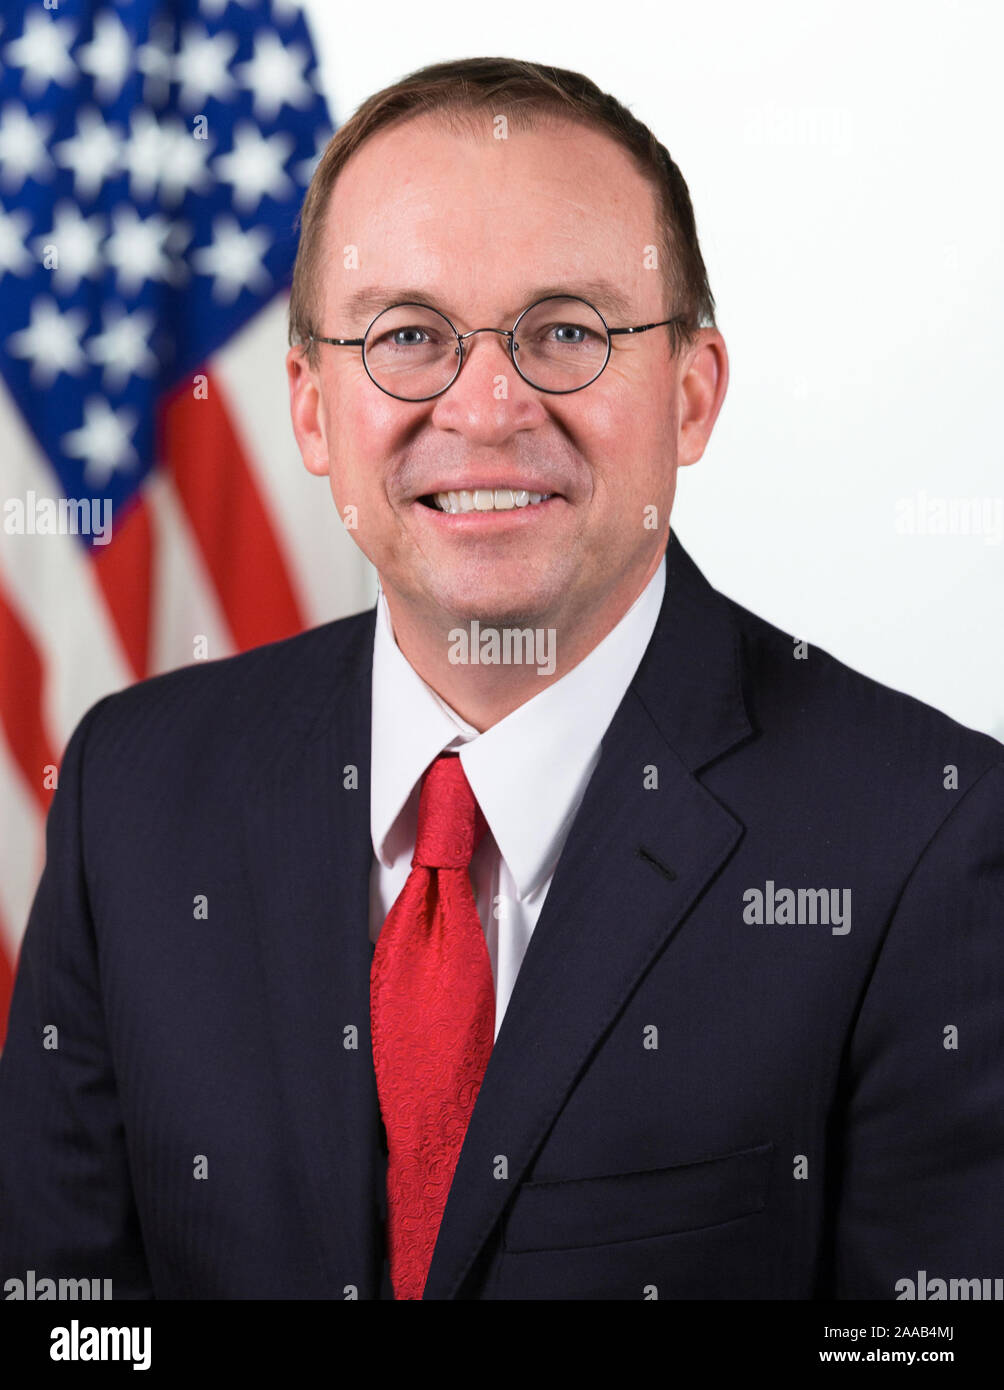 Mick Mulvaney, Executive Office of the President of the United States, Director of the Office of Management and Budget (OMB), acting White House Chief of Staff Stock Photo